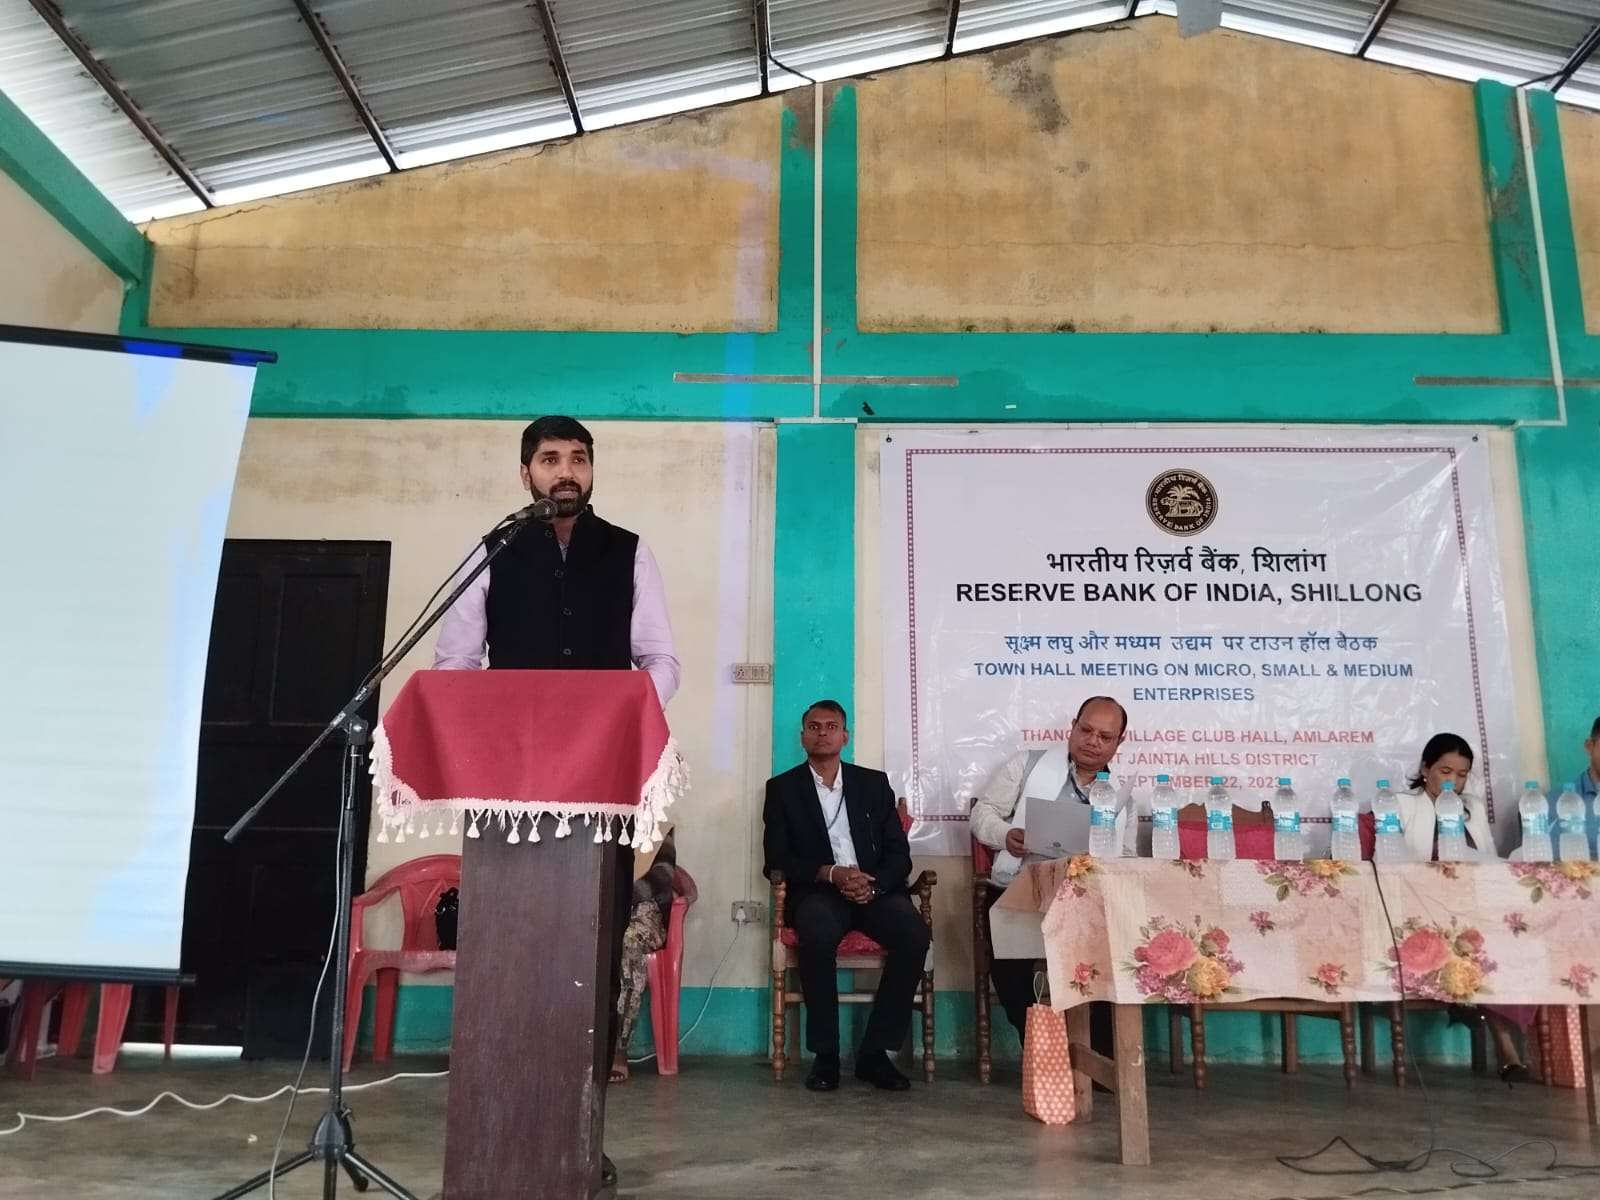 Town Hall Meeting on MSMEs held at Amlarem in WJH